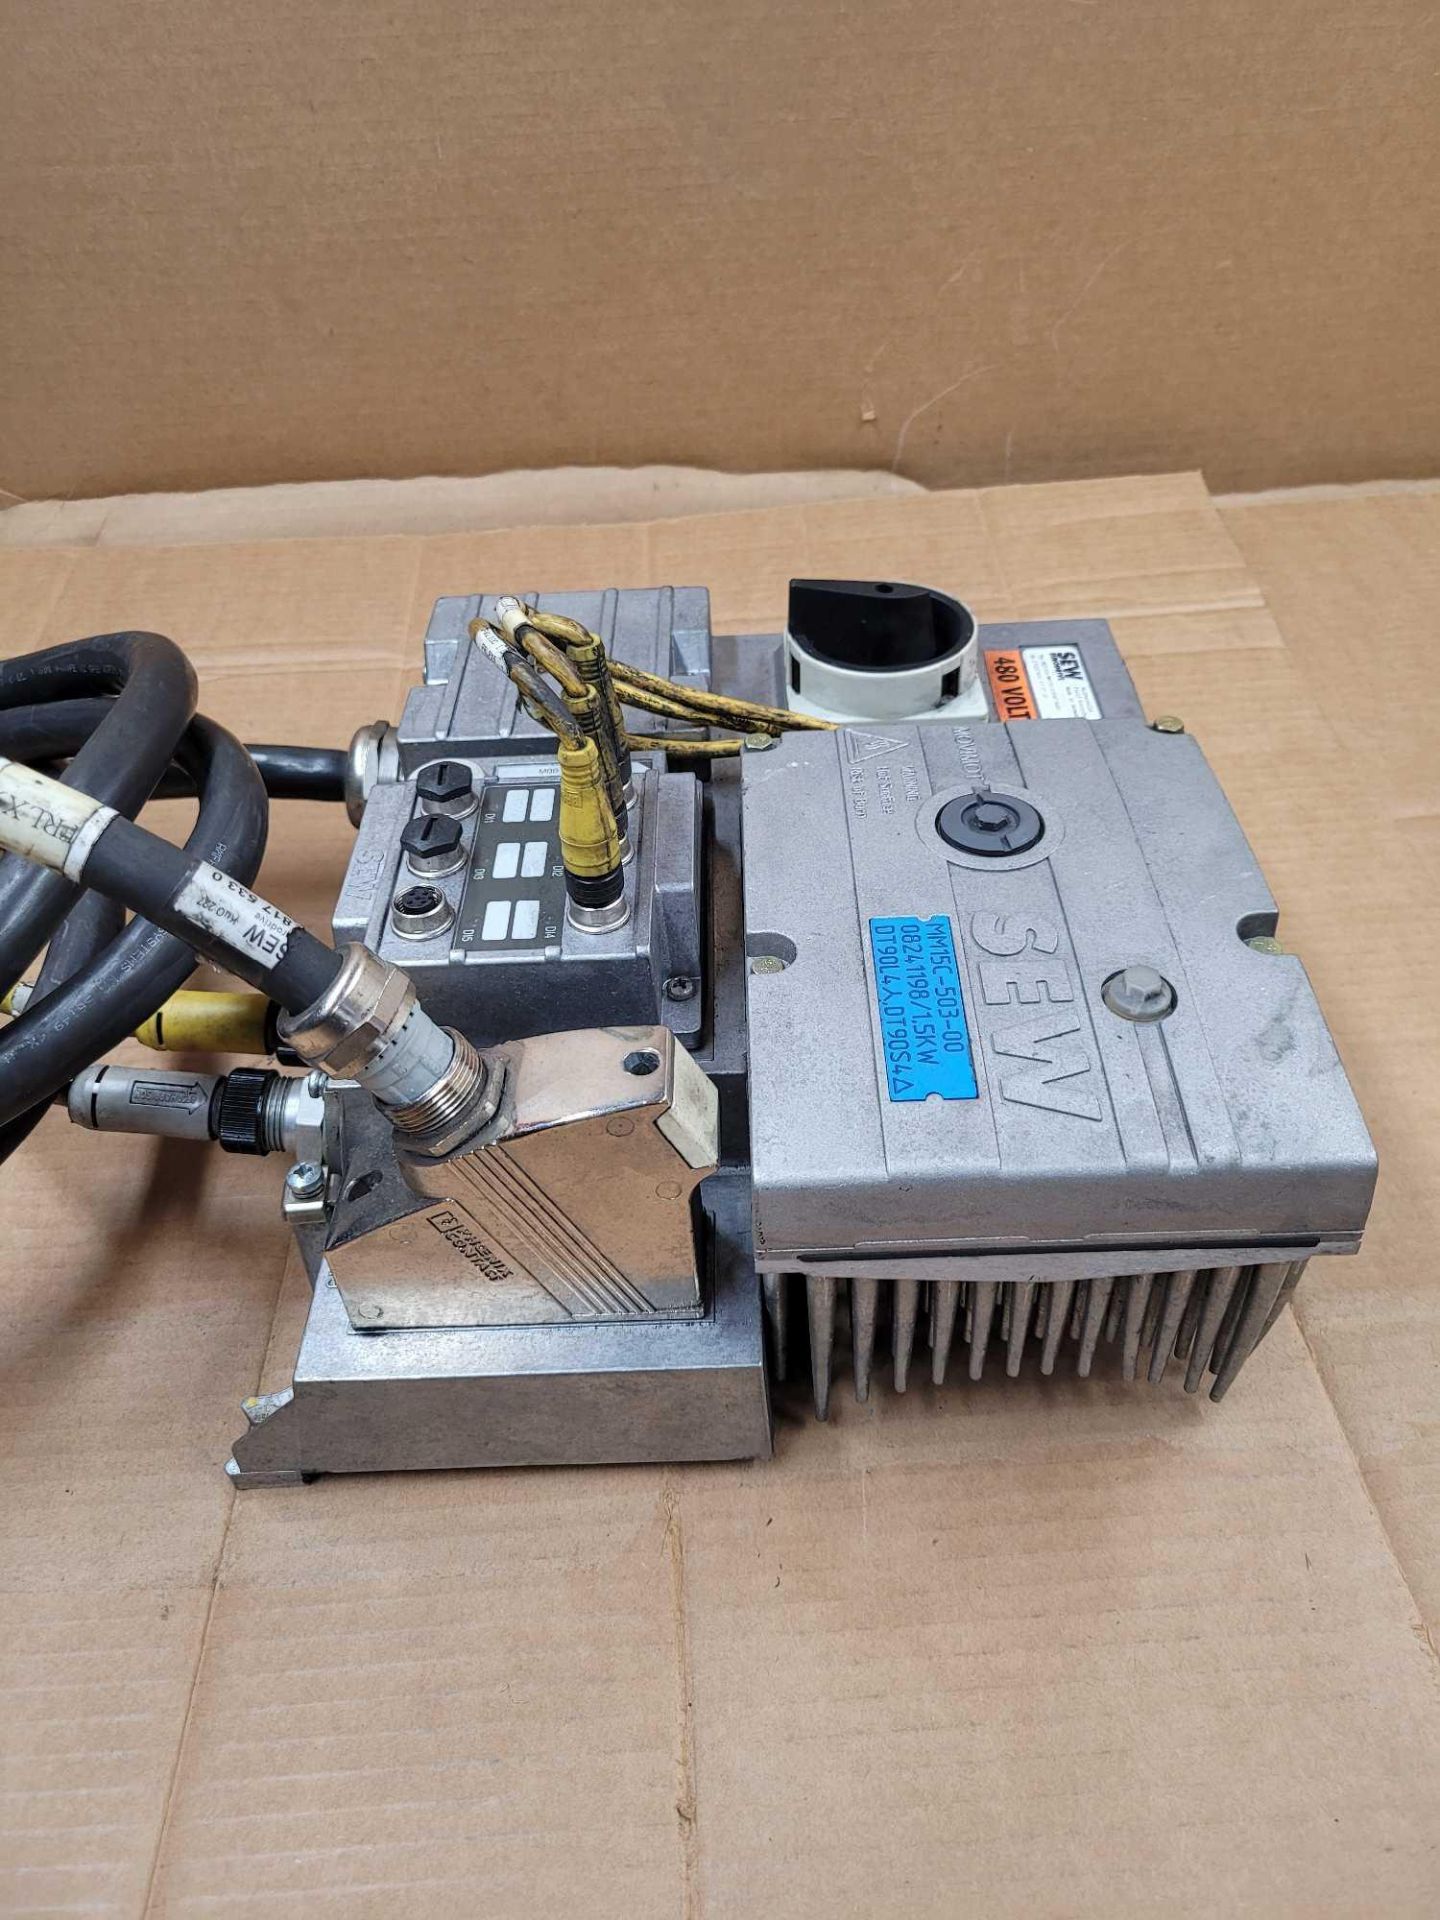 SEW MQD32A/MM15C/Z38G0/AGA3  /  Variable Frequency Drive  /  Lot Weight: 18.2 lbs - Image 4 of 5